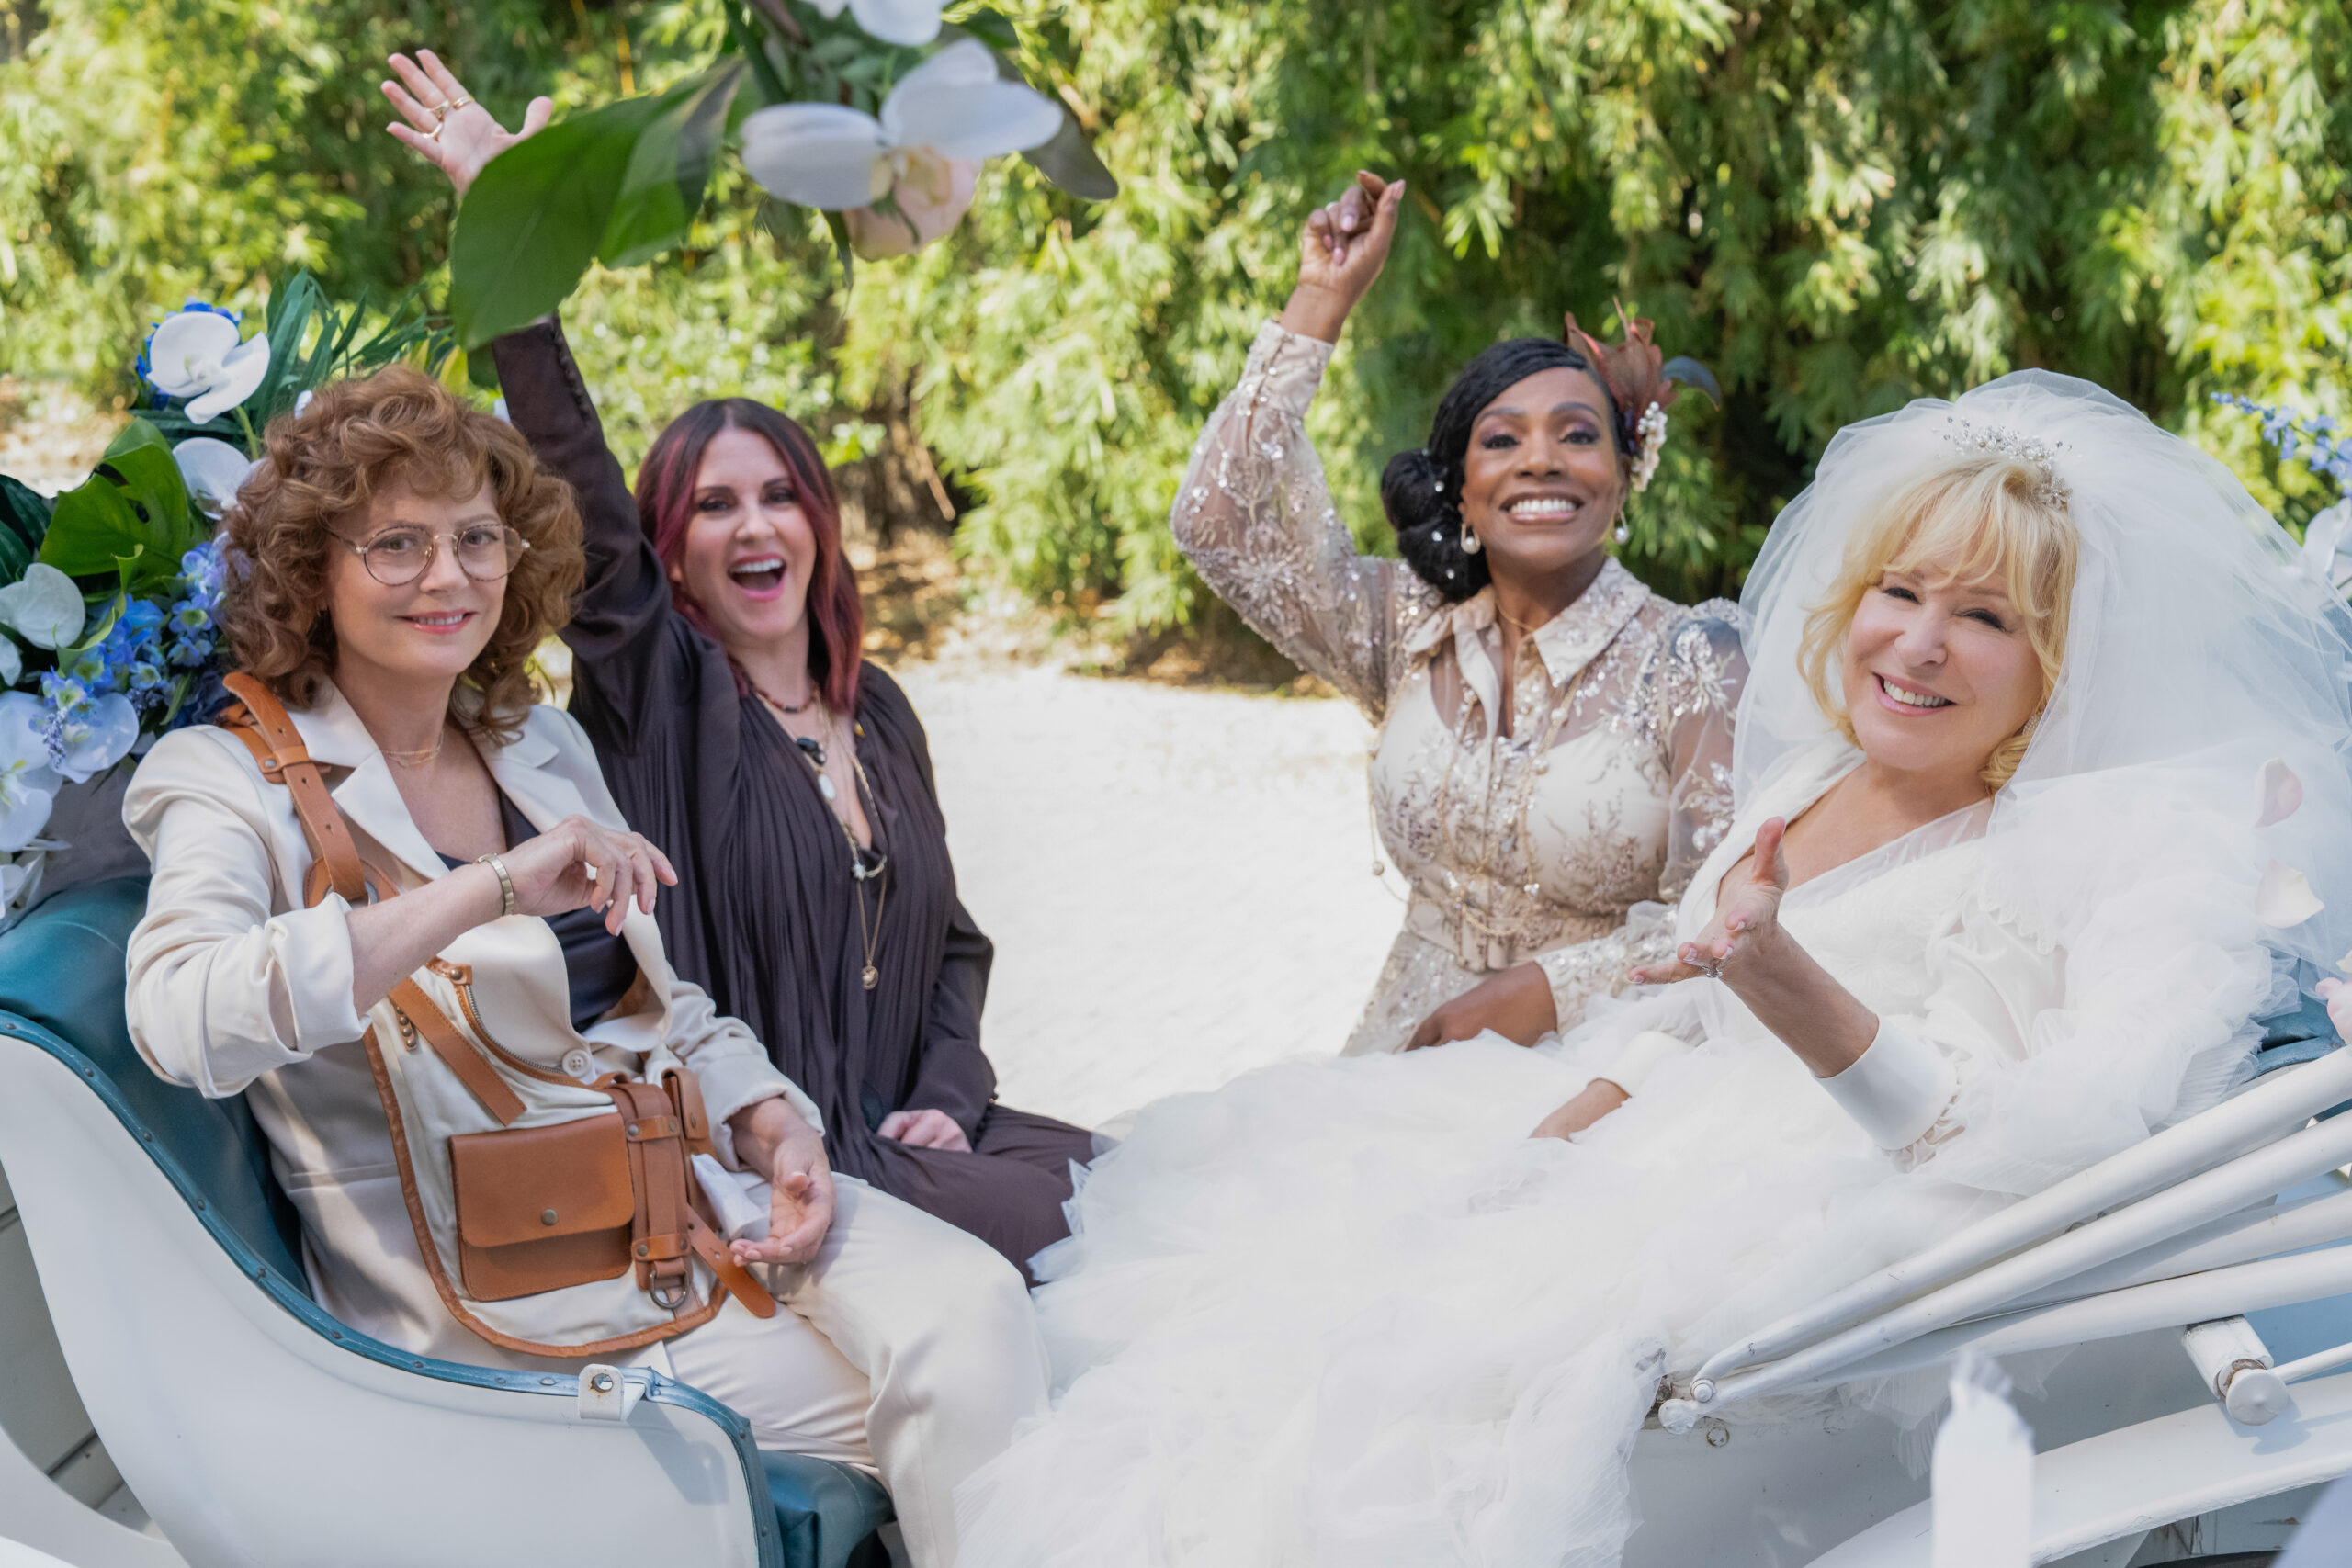 'The Fabulous Four': Sheryl Lee Ralph, Susan Sarandon, Bette Midler And Megan Mullally Are Reunited Friends